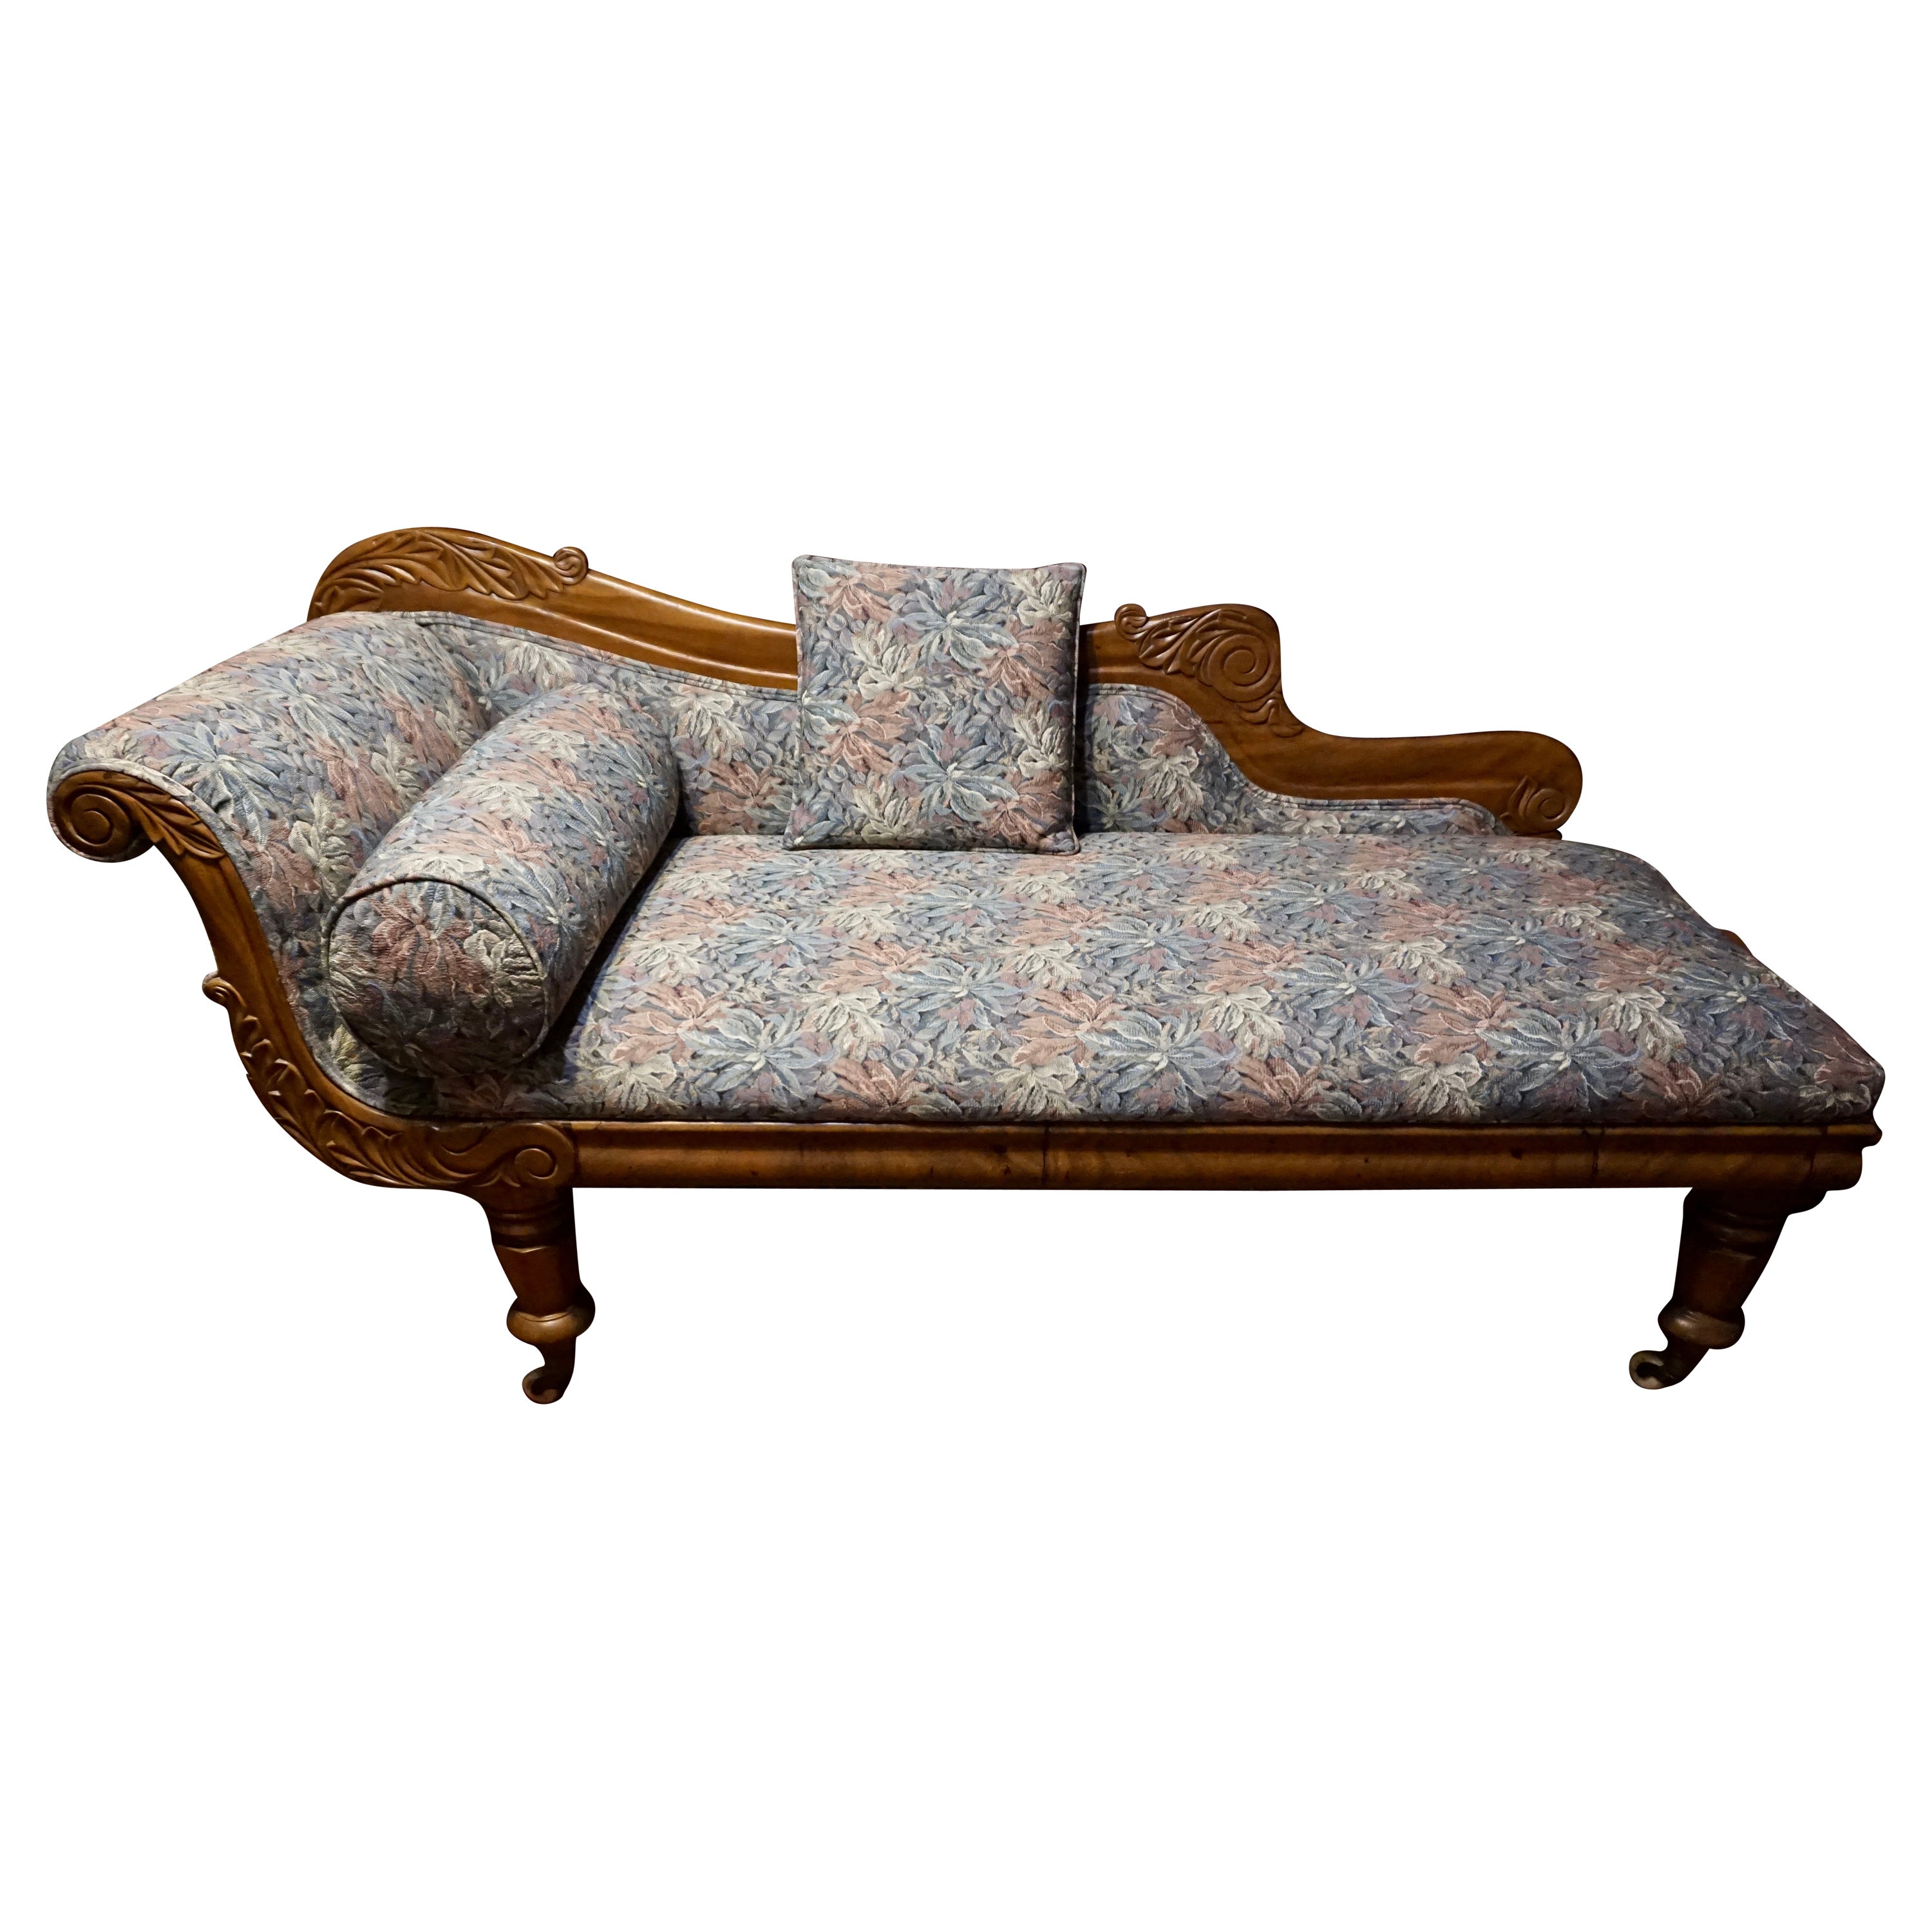 English Walnut Hand Carved Victorian Chaise Lounge on Porcelain Casters